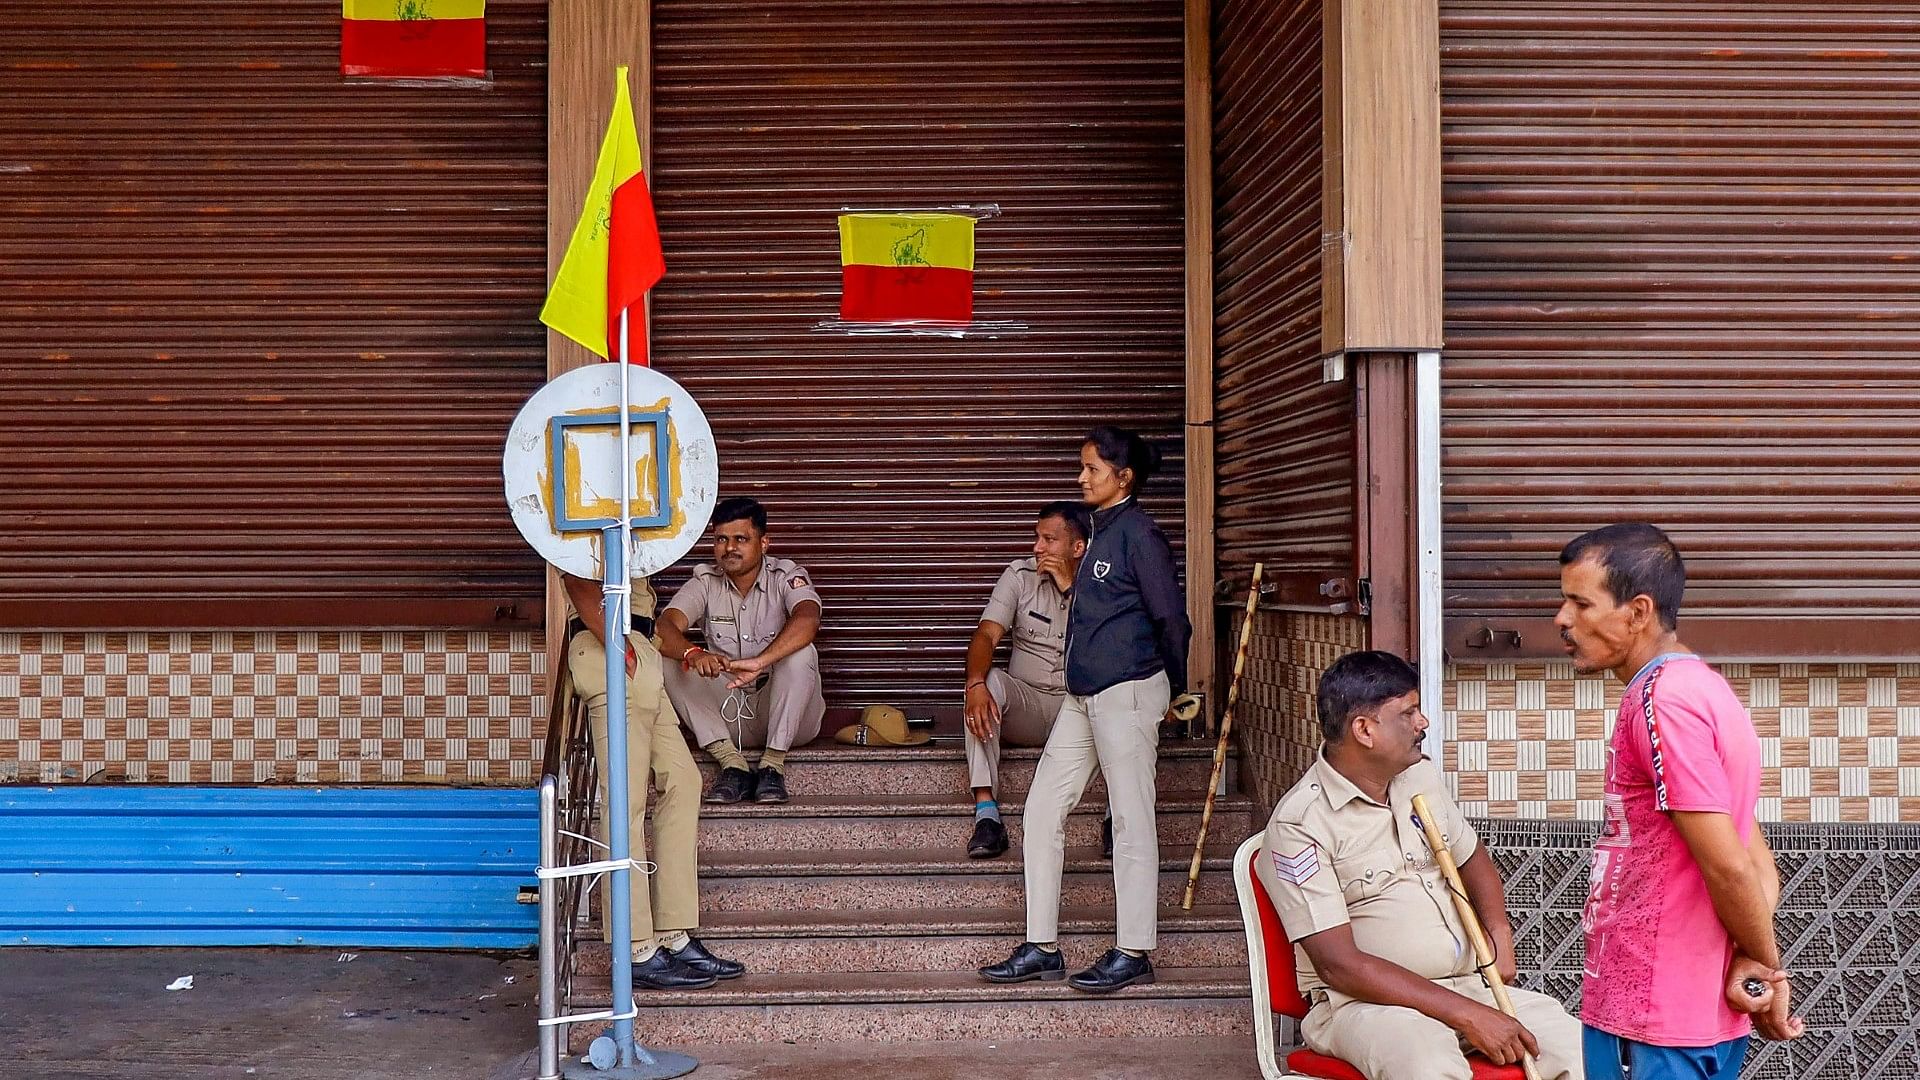 <div class="paragraphs"><p>The Bengaluru Police imposed Section 144 in the city from midnight, denying permission for any protests or processions. The Bengaluru Police Commissioner said, "No one can forcefully implement the bandh. If someone wants to observe it voluntarily, they can."</p></div>